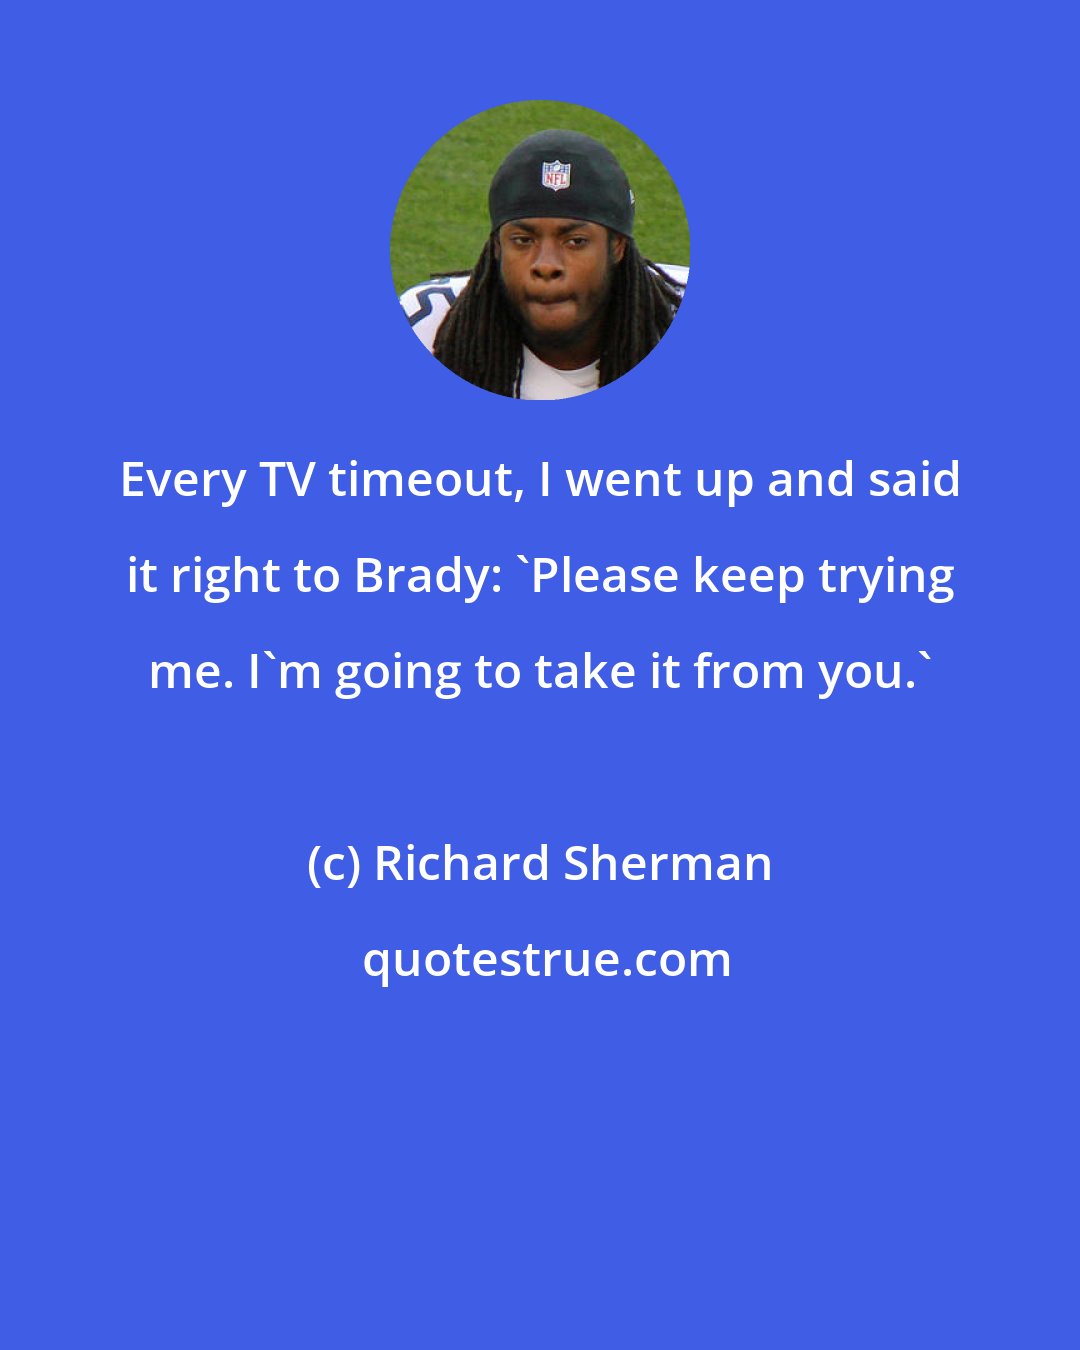 Richard Sherman: Every TV timeout, I went up and said it right to Brady: 'Please keep trying me. I'm going to take it from you.'